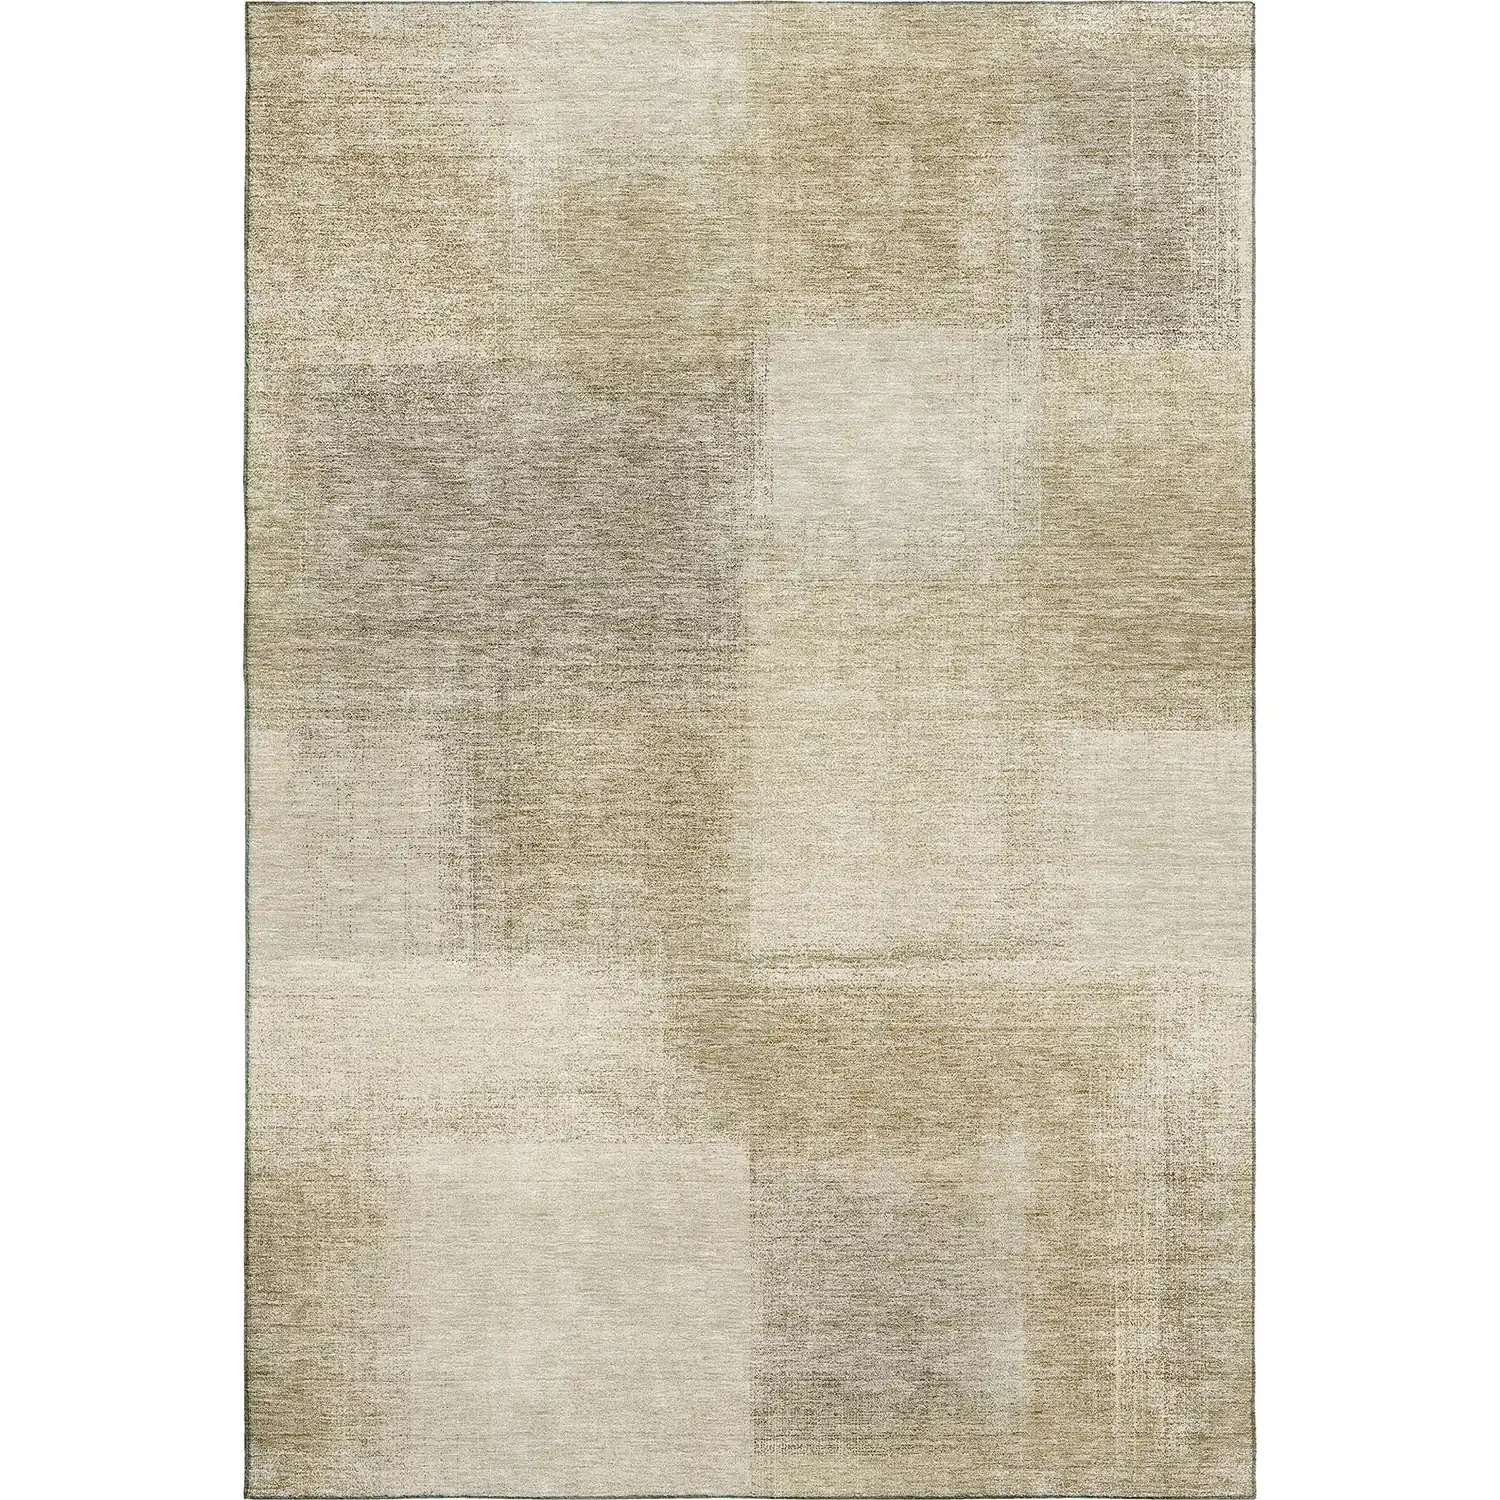 Trevi TV10 Taupe Modern Rug Product Image